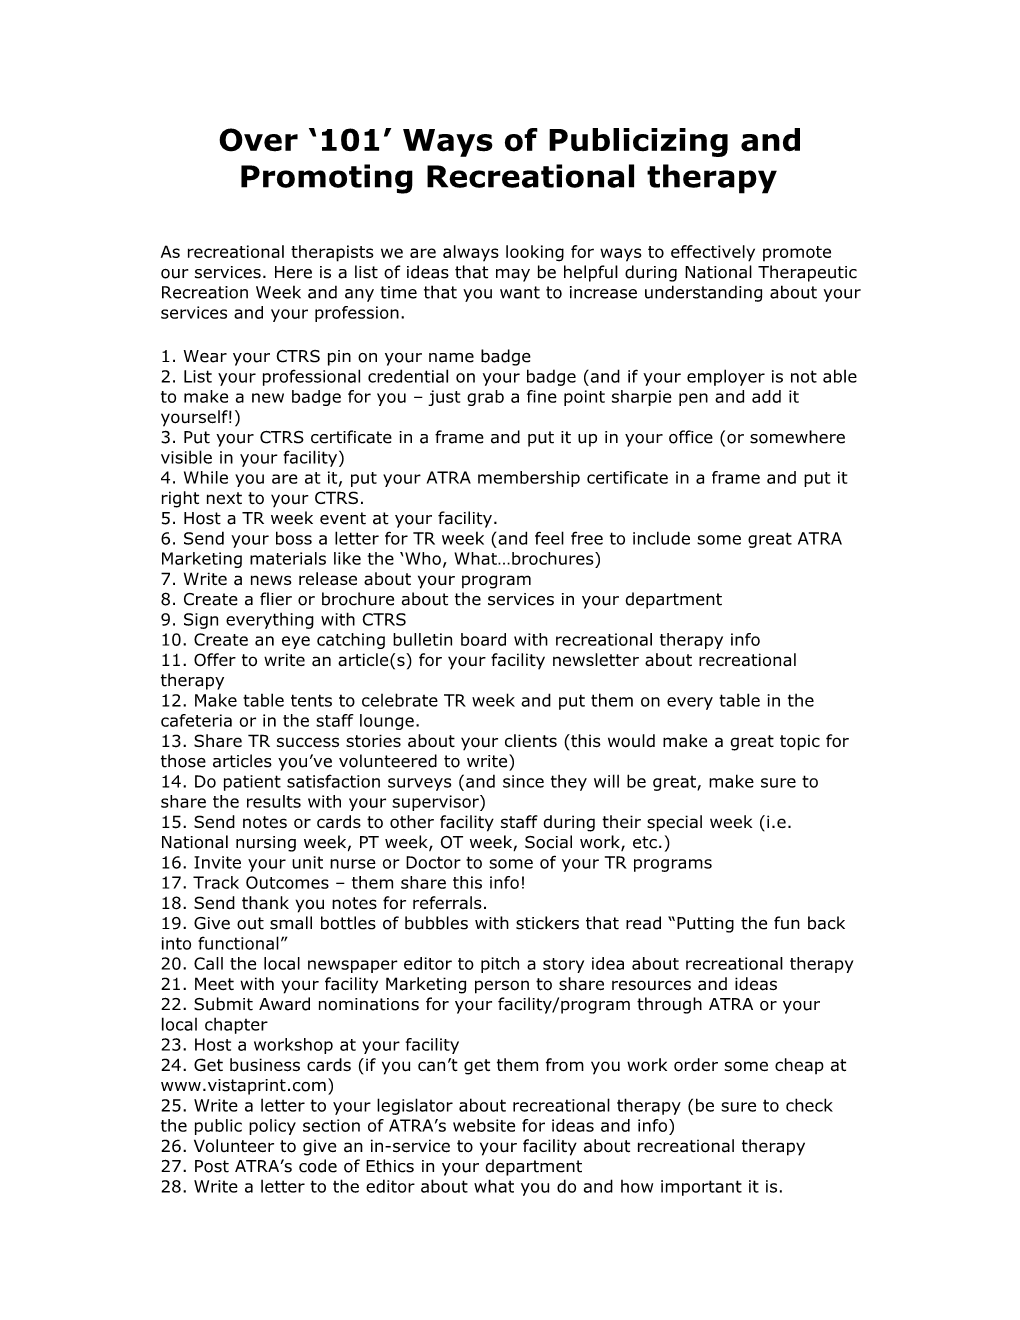 Over 101 Ways of Publicizing and Promoting Recreational Therapy